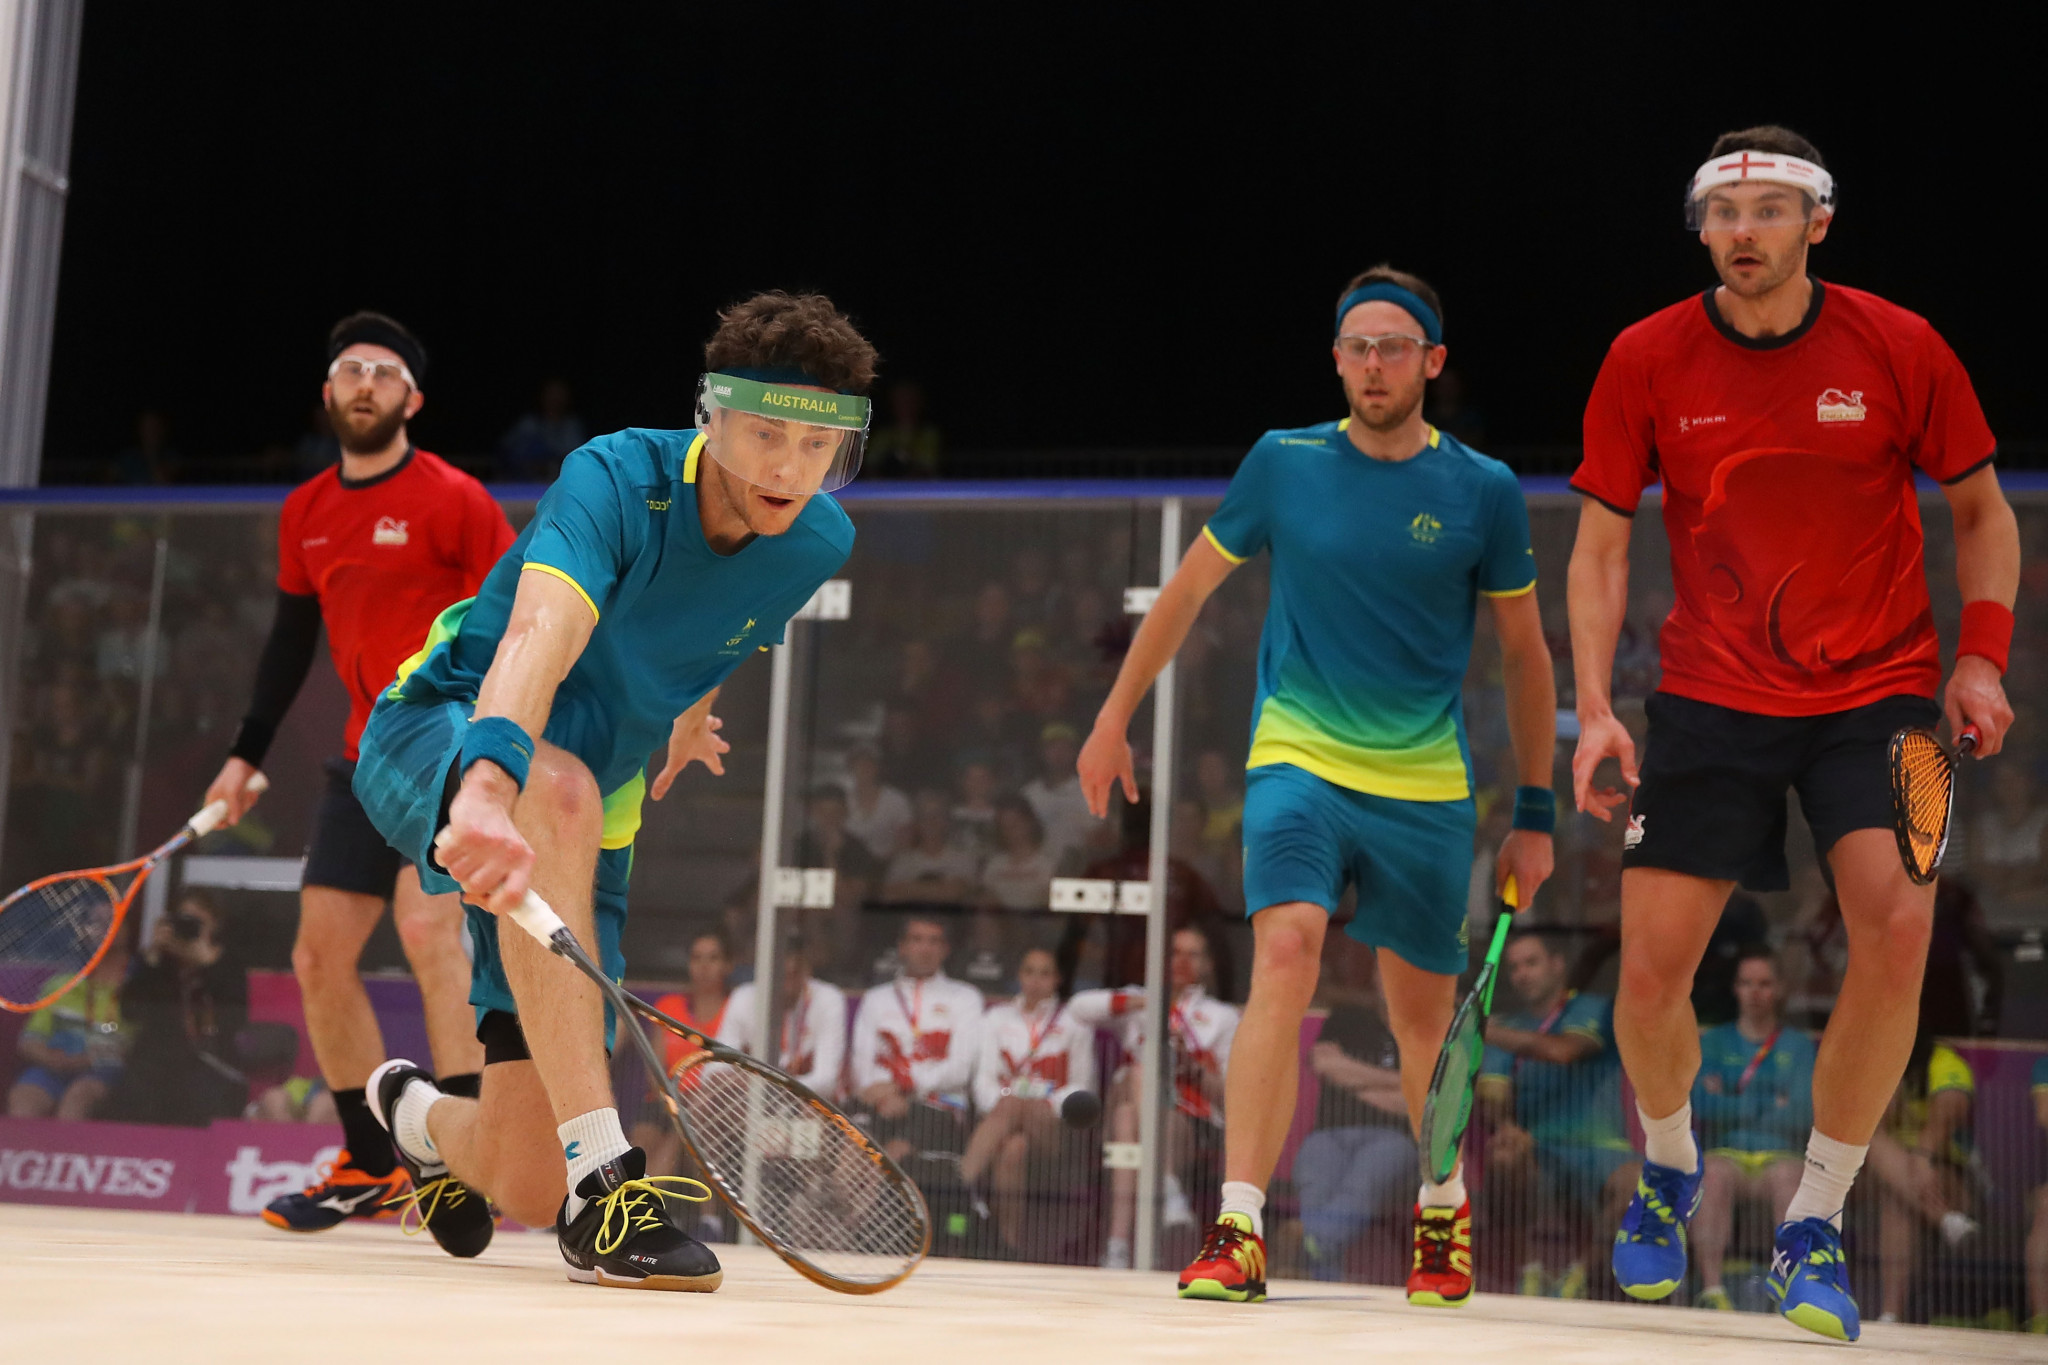 Cuskelly and Pilley remain on course for WSF World Doubles Championships defence in Gold Coast